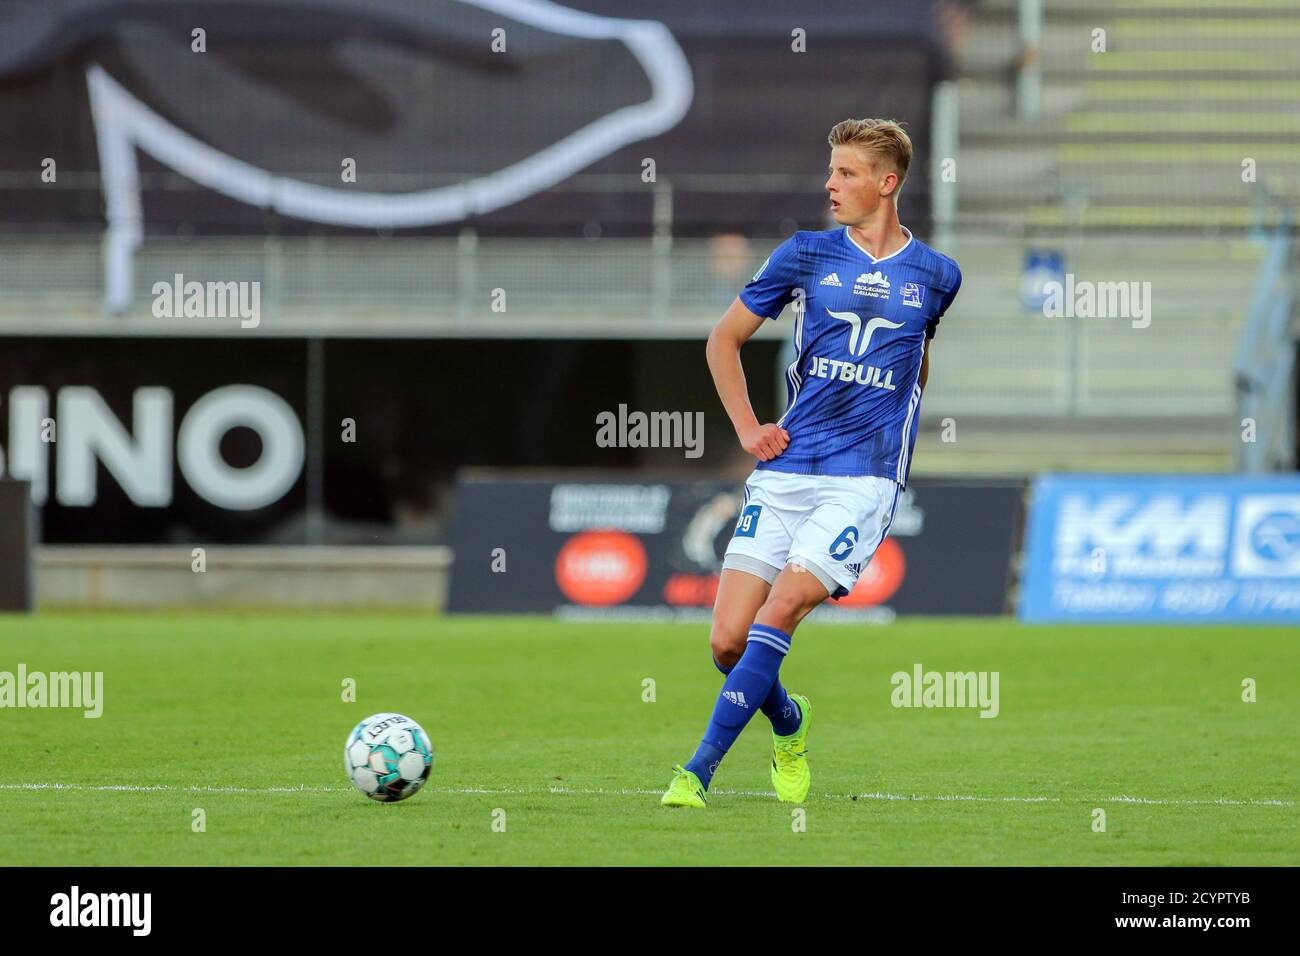 Lyngby, Denmark. 22nd, June 2020. Frederik Winther (6) of Lyngby seen during the 3F Superliga match between Lyngby Boldklub and Odense Boldklub at Lyngby Stadium. (Photo credit: Gonzales Photo - Rune Mathiesen). Stock Photo